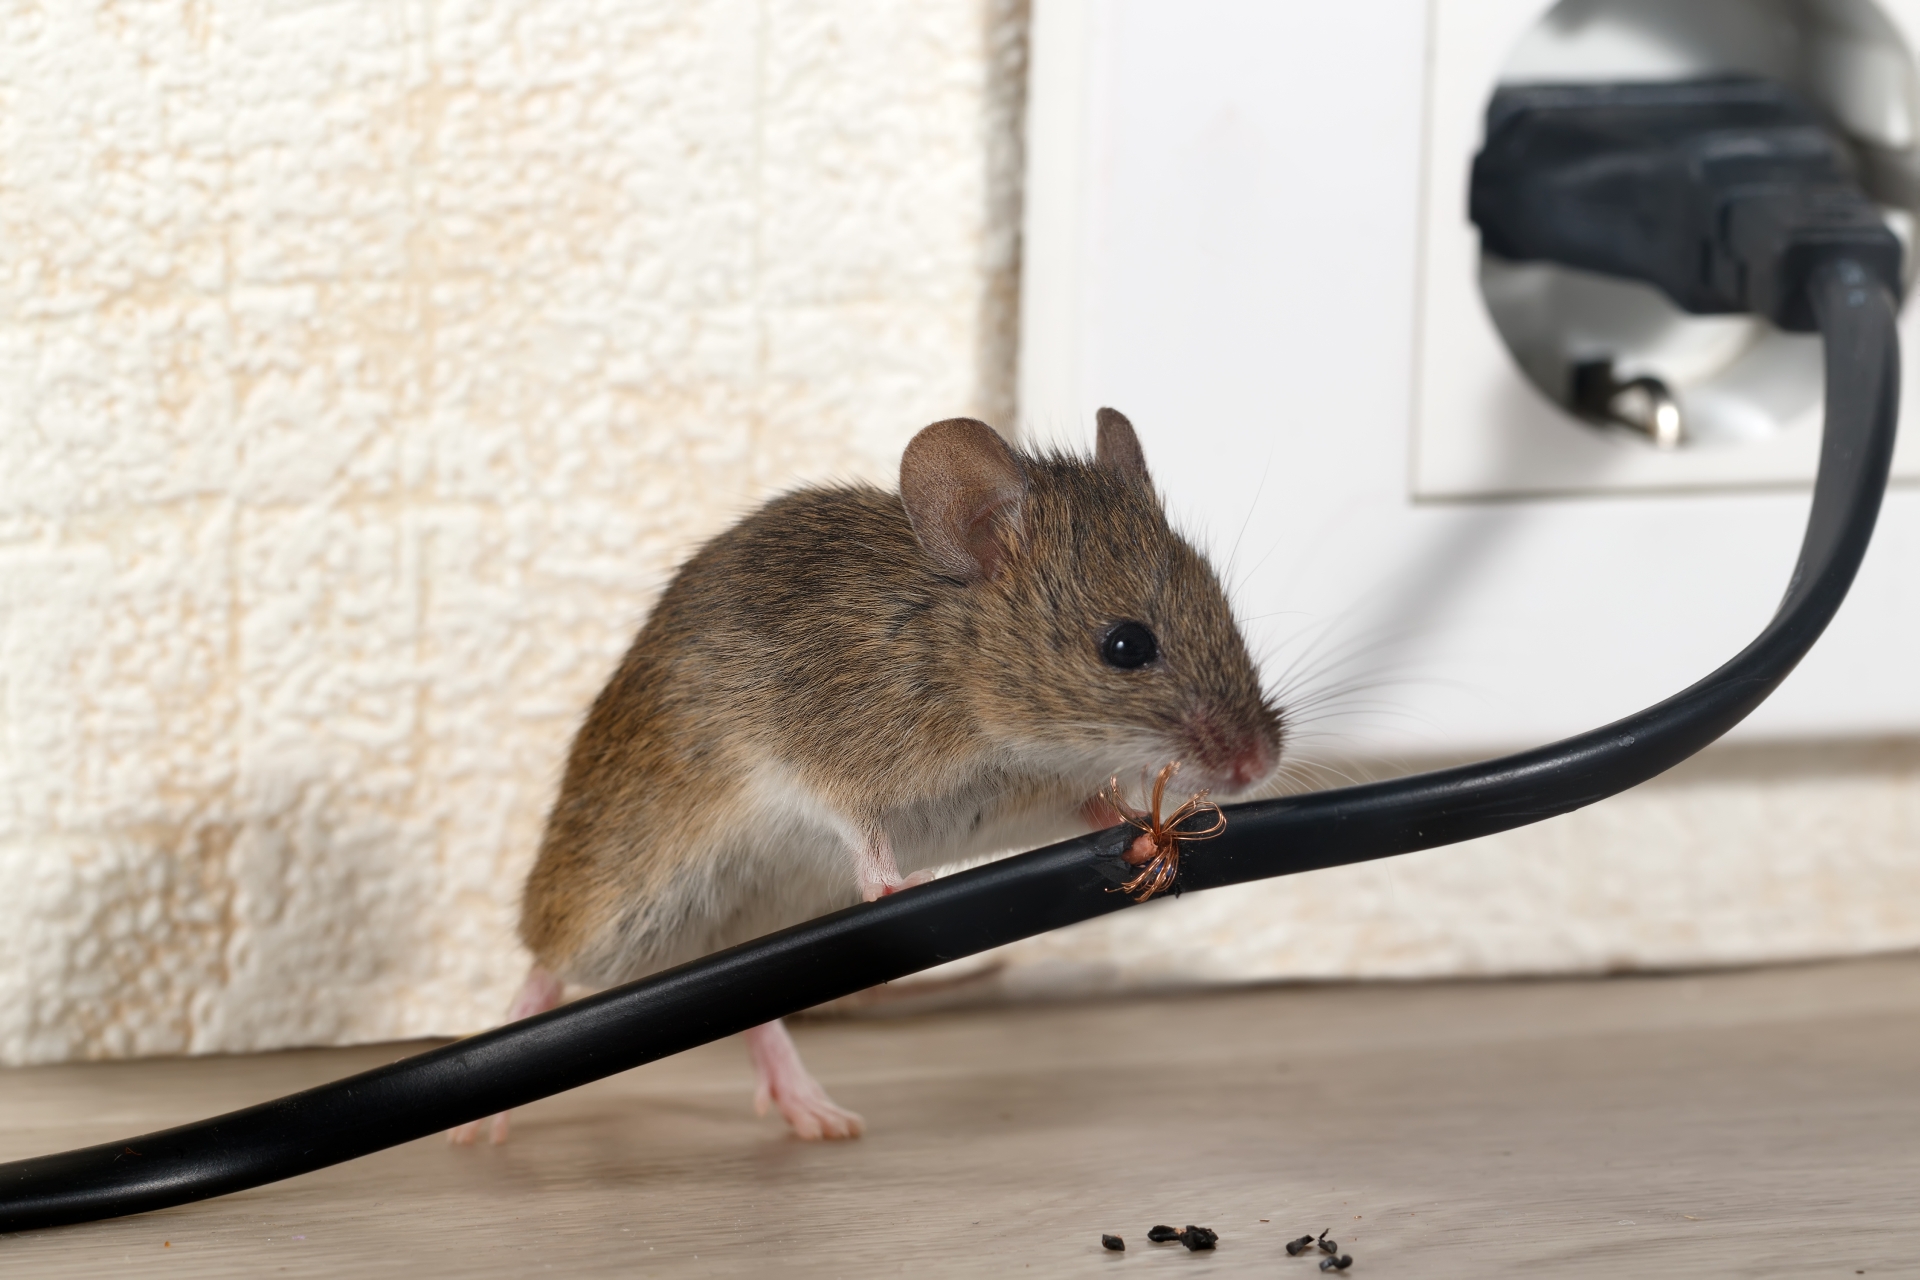 Mice Infestation, Pest Control in Tulse Hill, West Norwood, SE27. Call Now 020 8166 9746